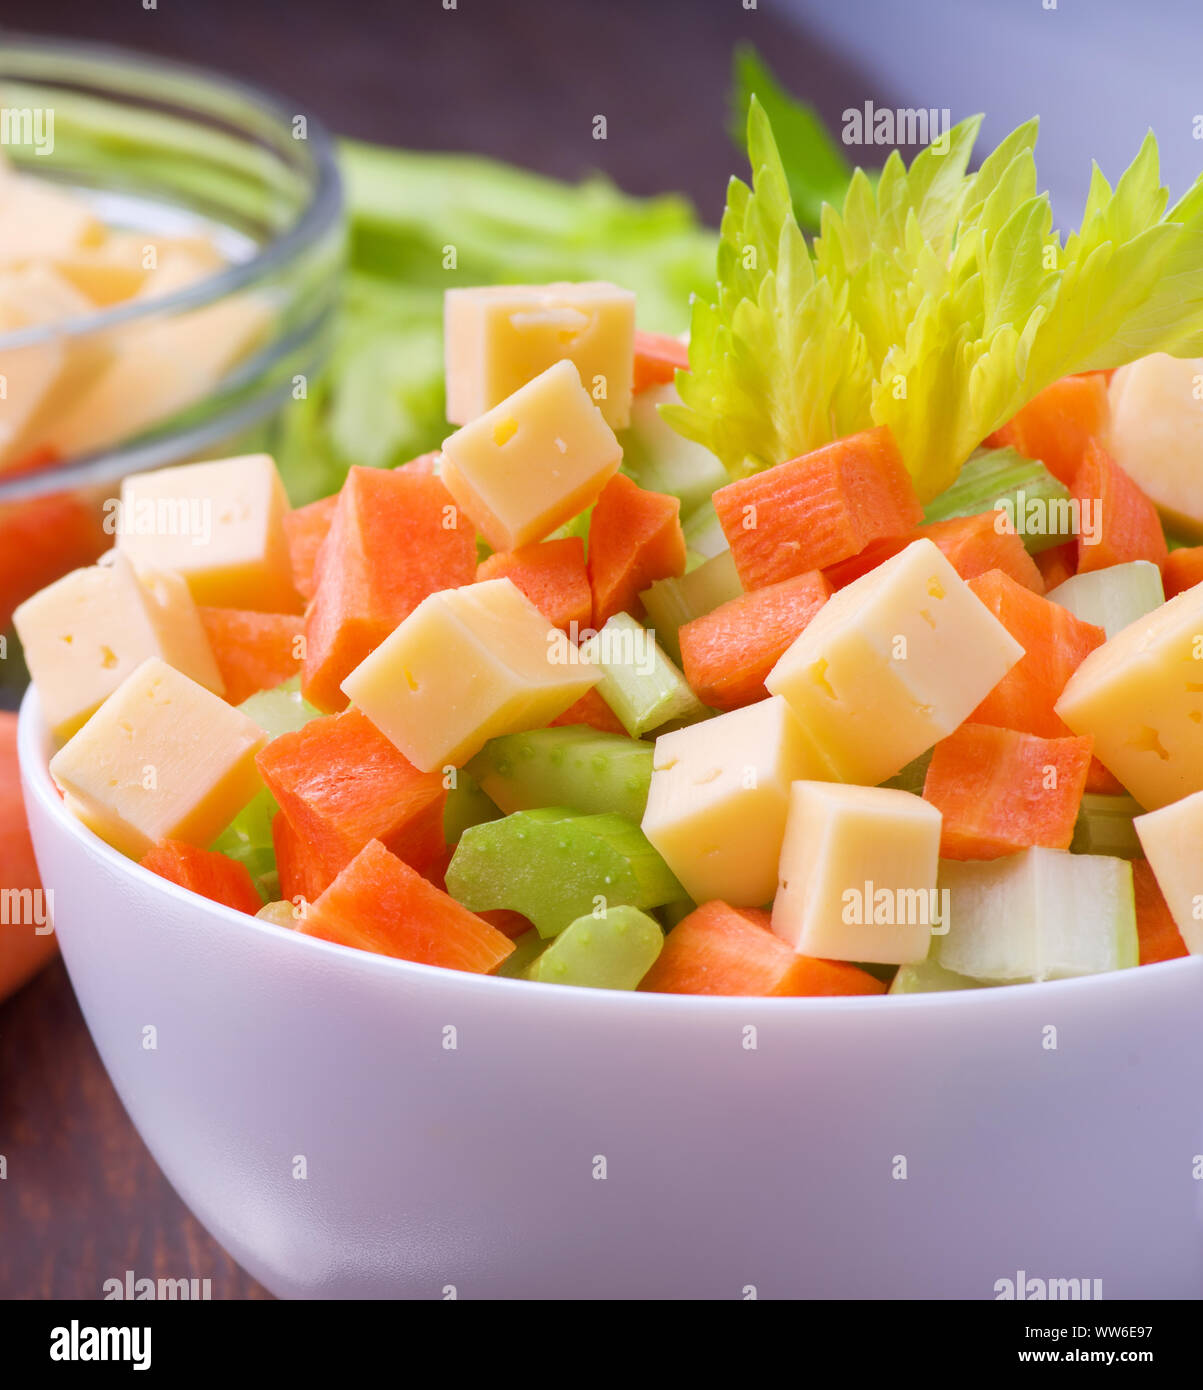 Fresh salad from stalks of celery, carrots, apples and cheese. Fitness breakfast, healthy. Stock Photo